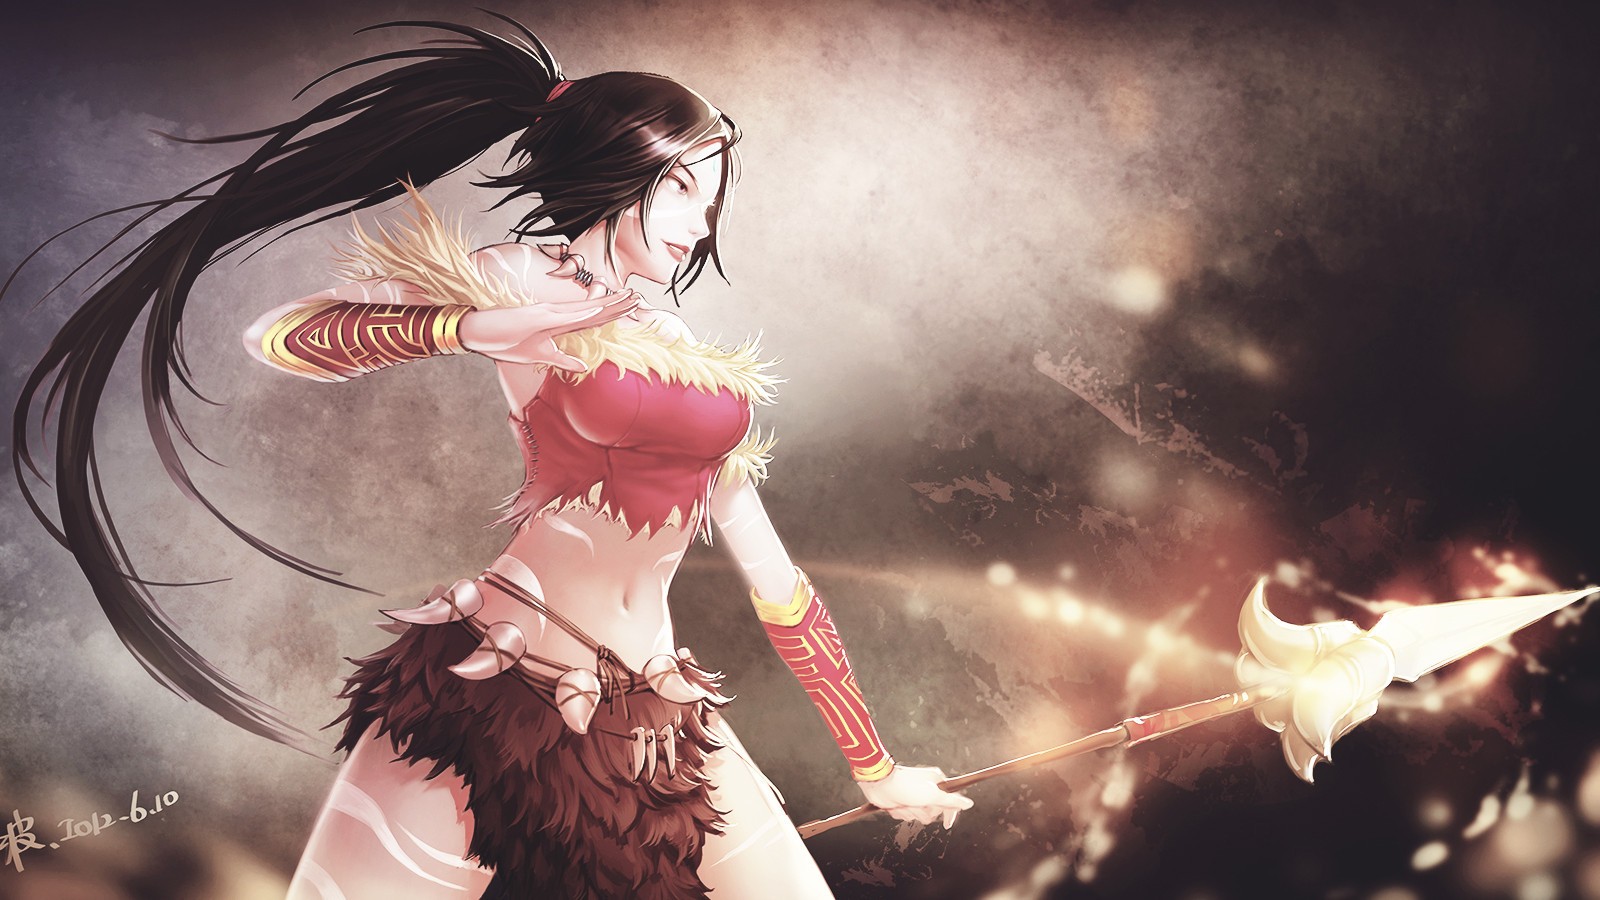 Anime 1600x900 anime anime girls video games League of Legends Nidalee (League of Legends) brunette spear PC gaming video game girls fan art video game characters belly watermarked